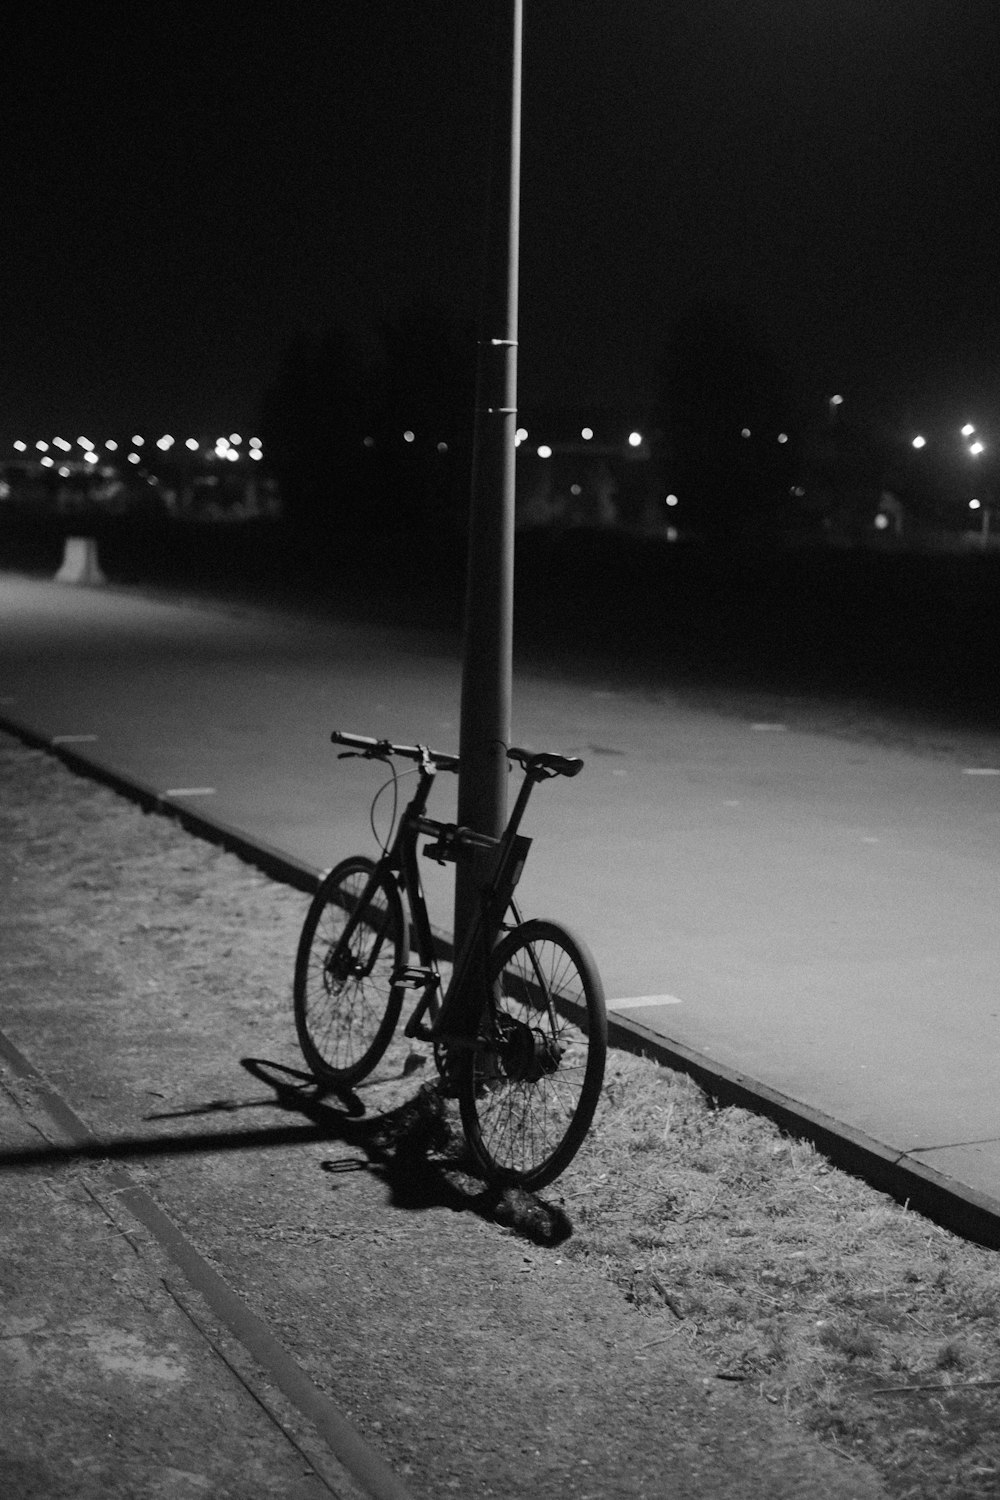 a bicycle parked on a street corner